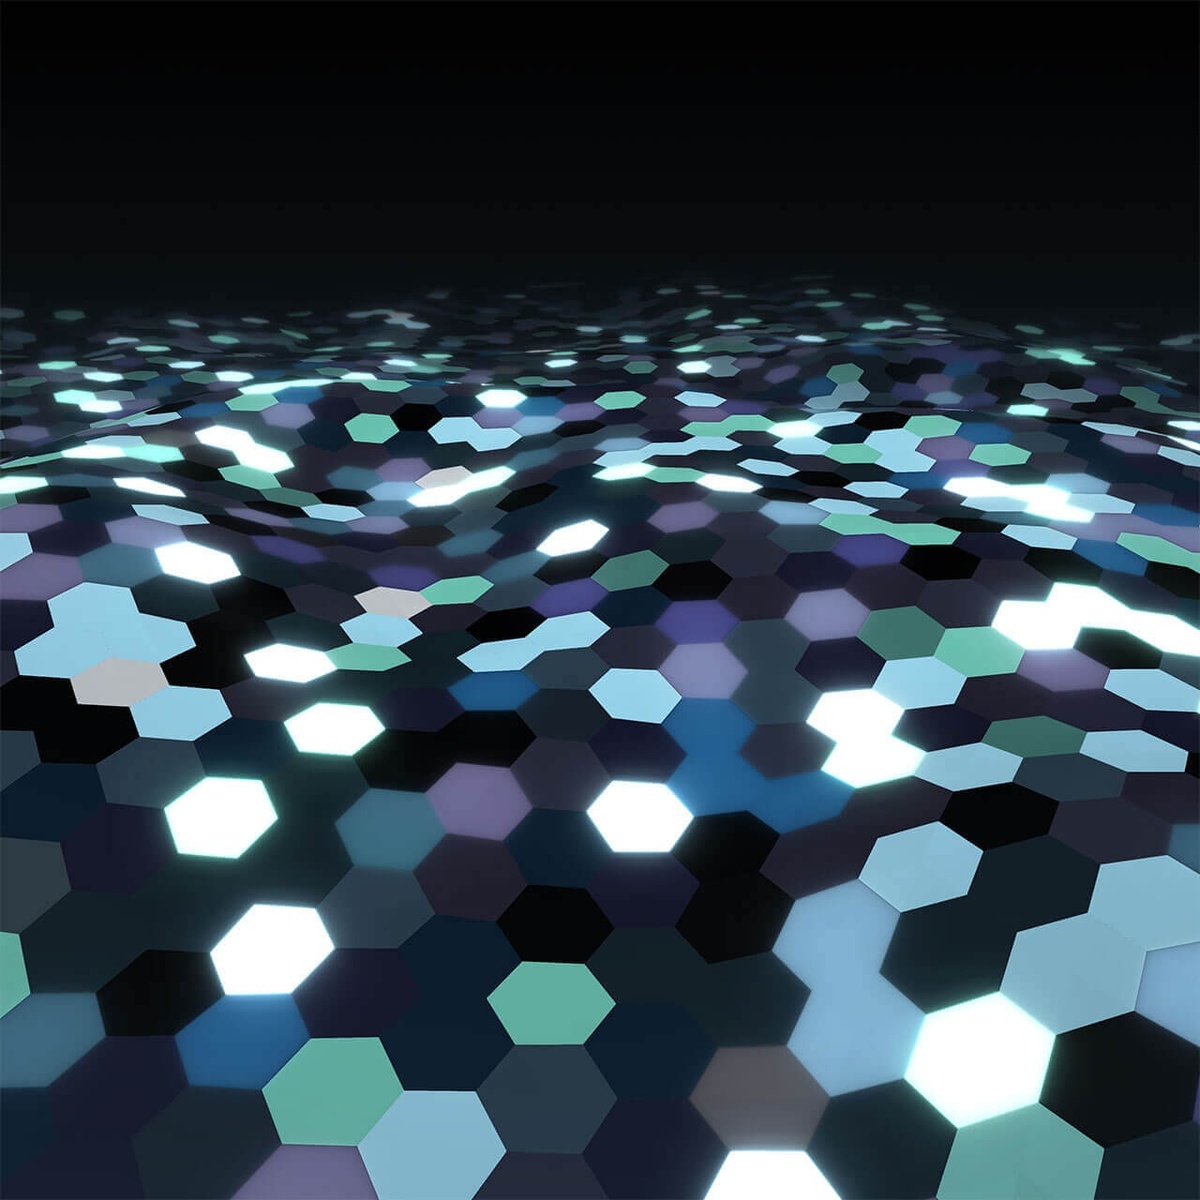 Render of hexagonal pattern on a wave-like surface